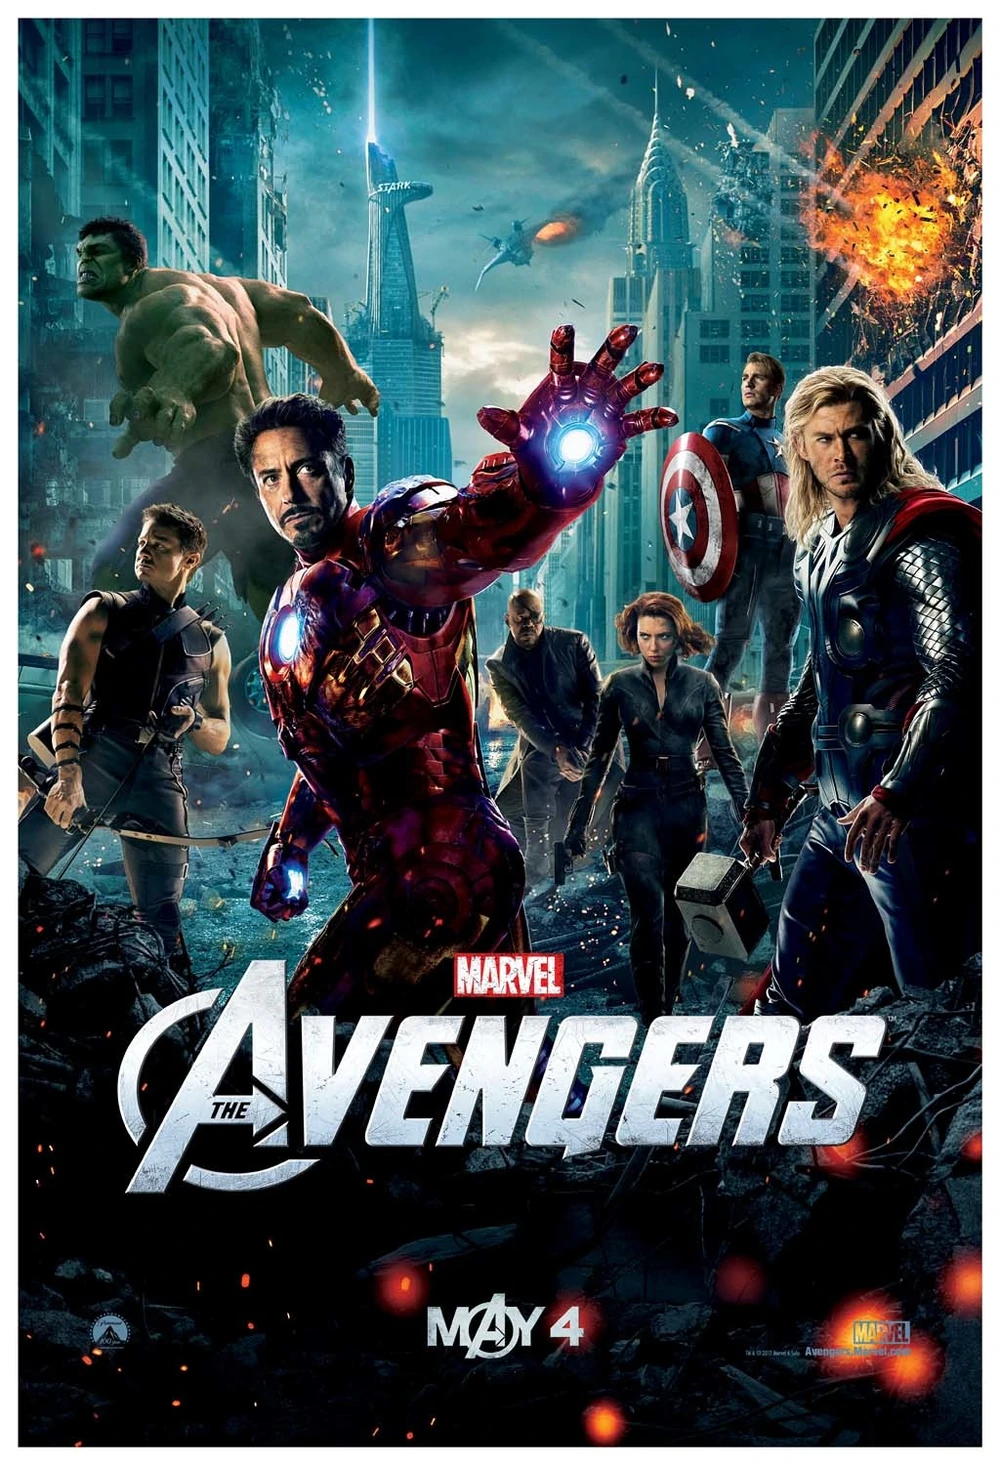 [RECENSIONE] The Avengers (Joss Whedon)